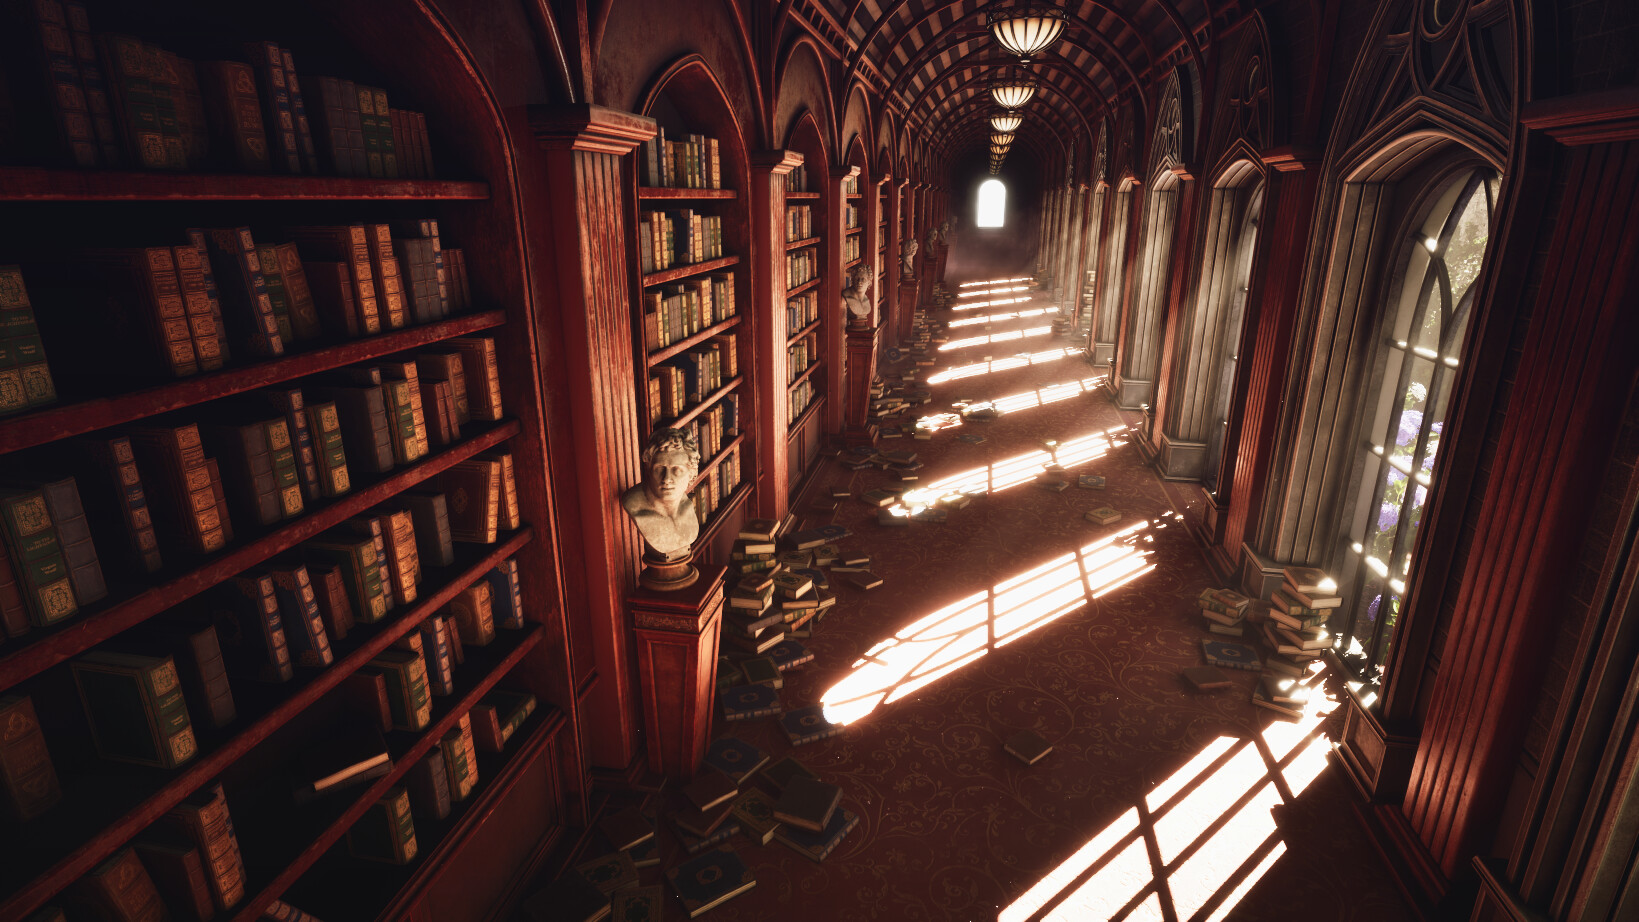 Sunset Library